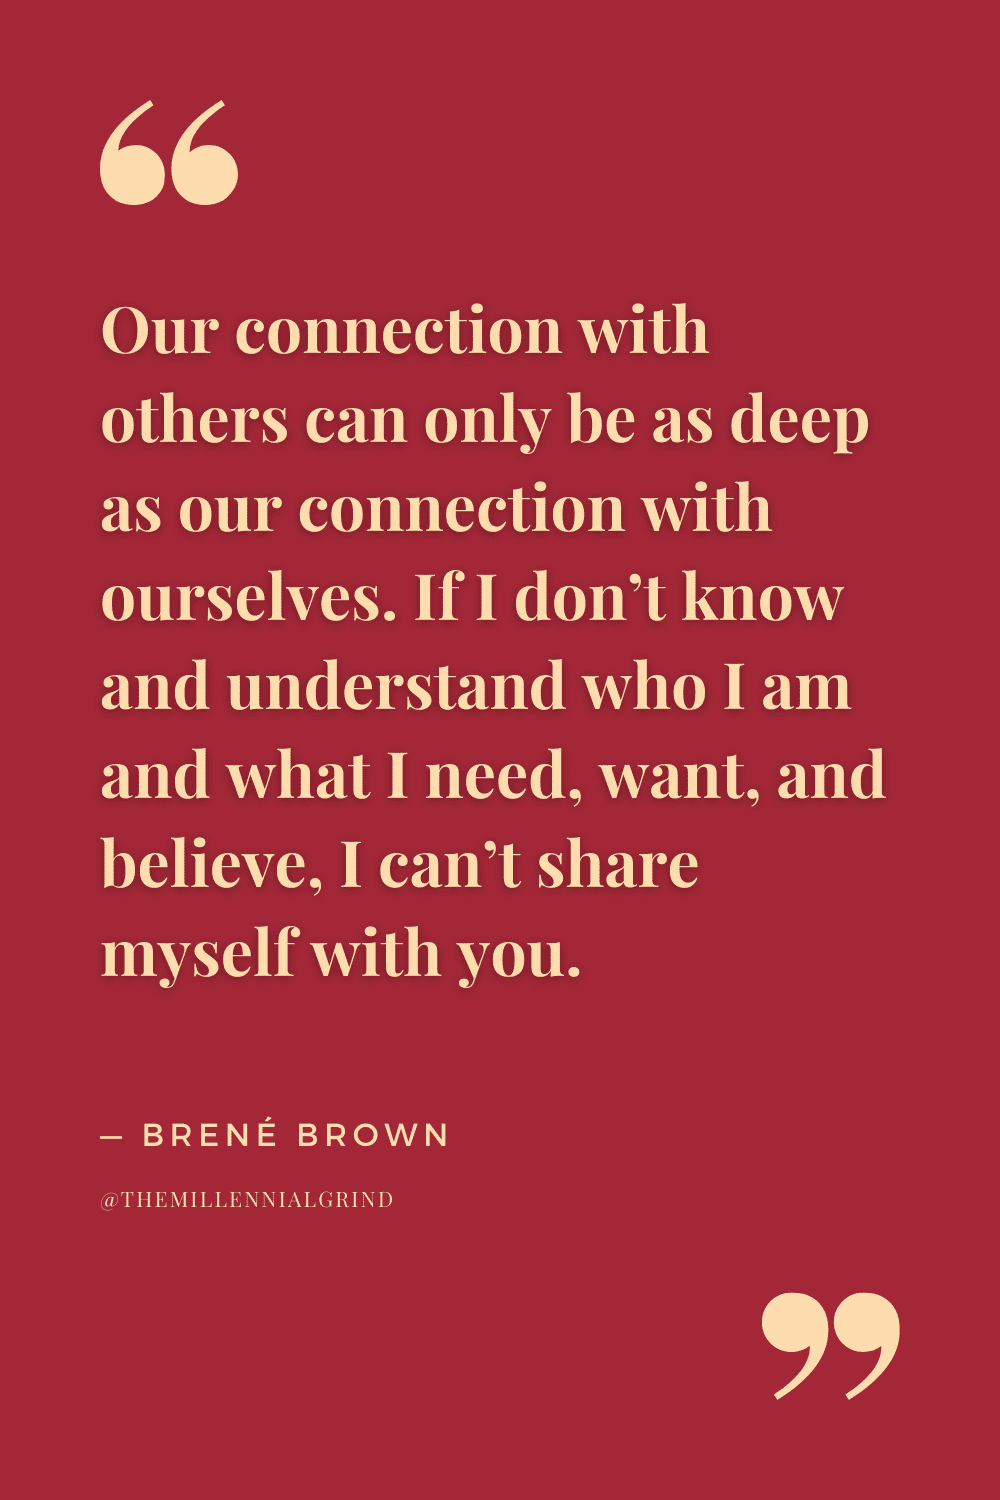 30 Best Quotes from Atlas of the Heart by Brené Brown